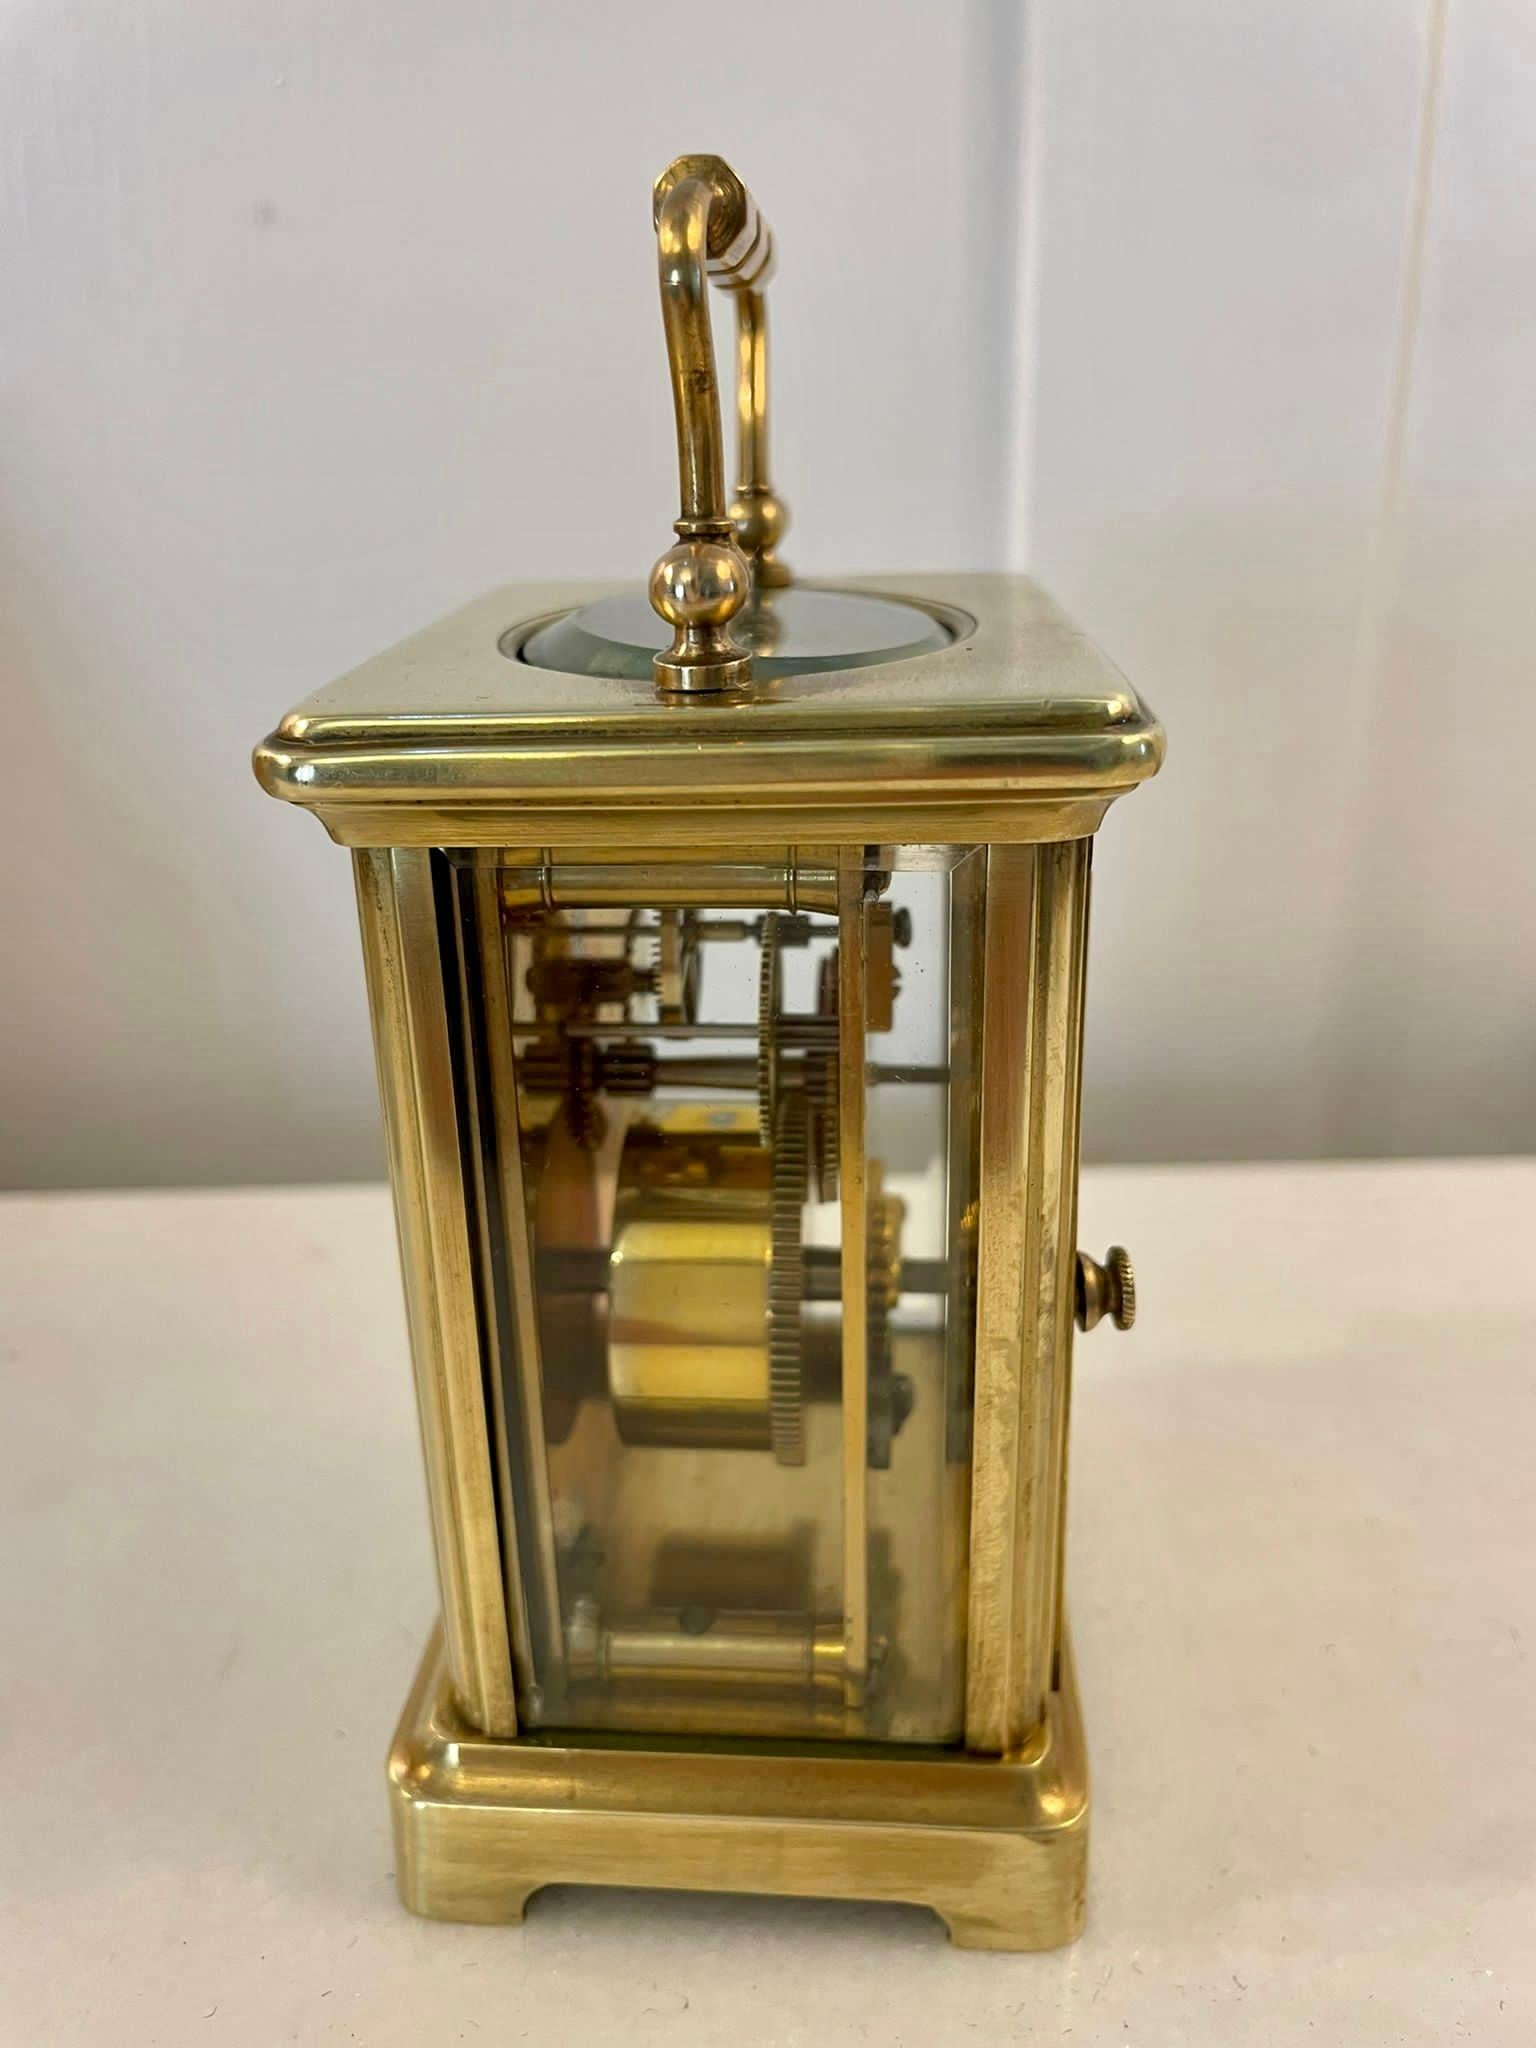 Antique Victorian quality brass carriage clock having bevelled edged glass panels, white enamel dial with Roman numerals, original hands, 8 day movement and a shaped carrying handle to the top 


In good working order


Dimensions:
Height 14.5 cm